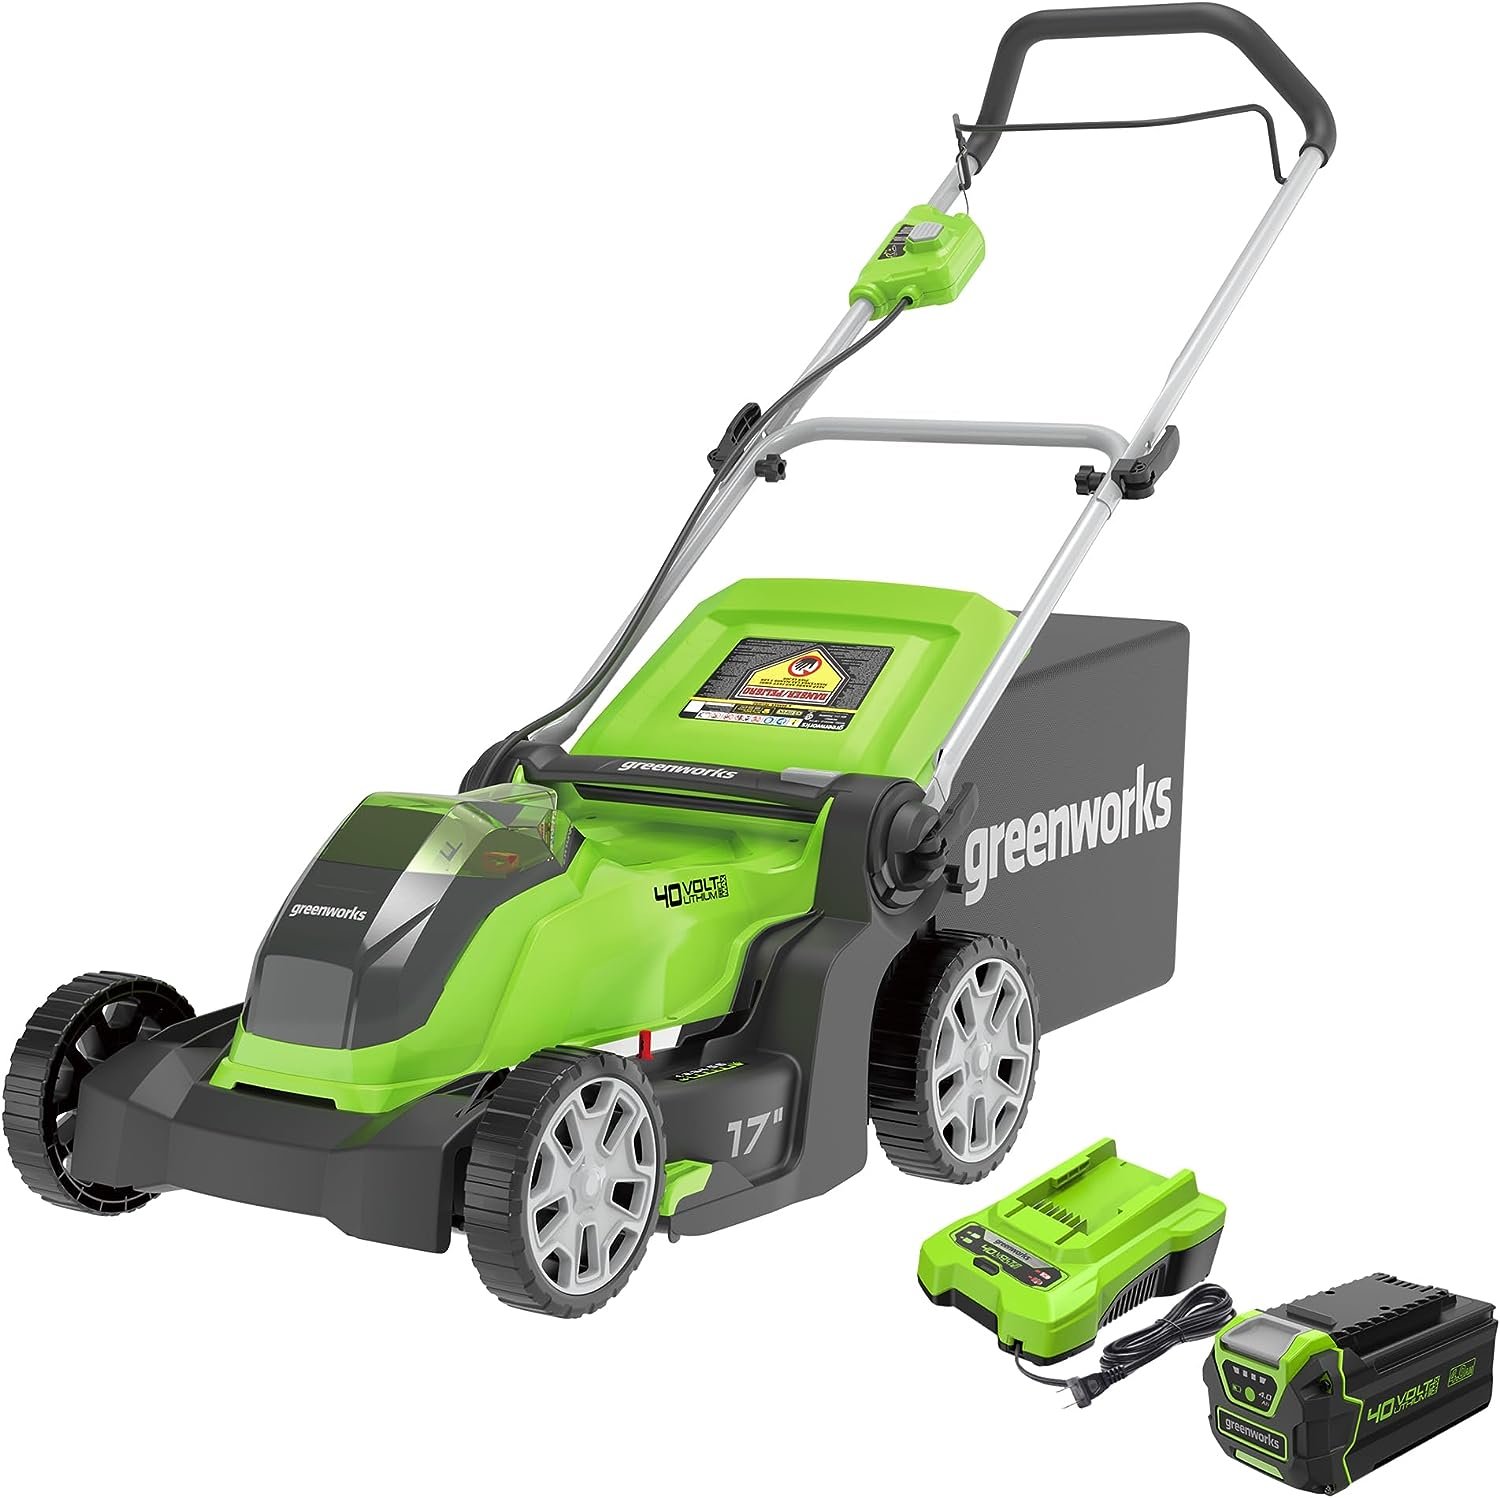 Review of Greenworks 2-In-1 Push Lawn Mower